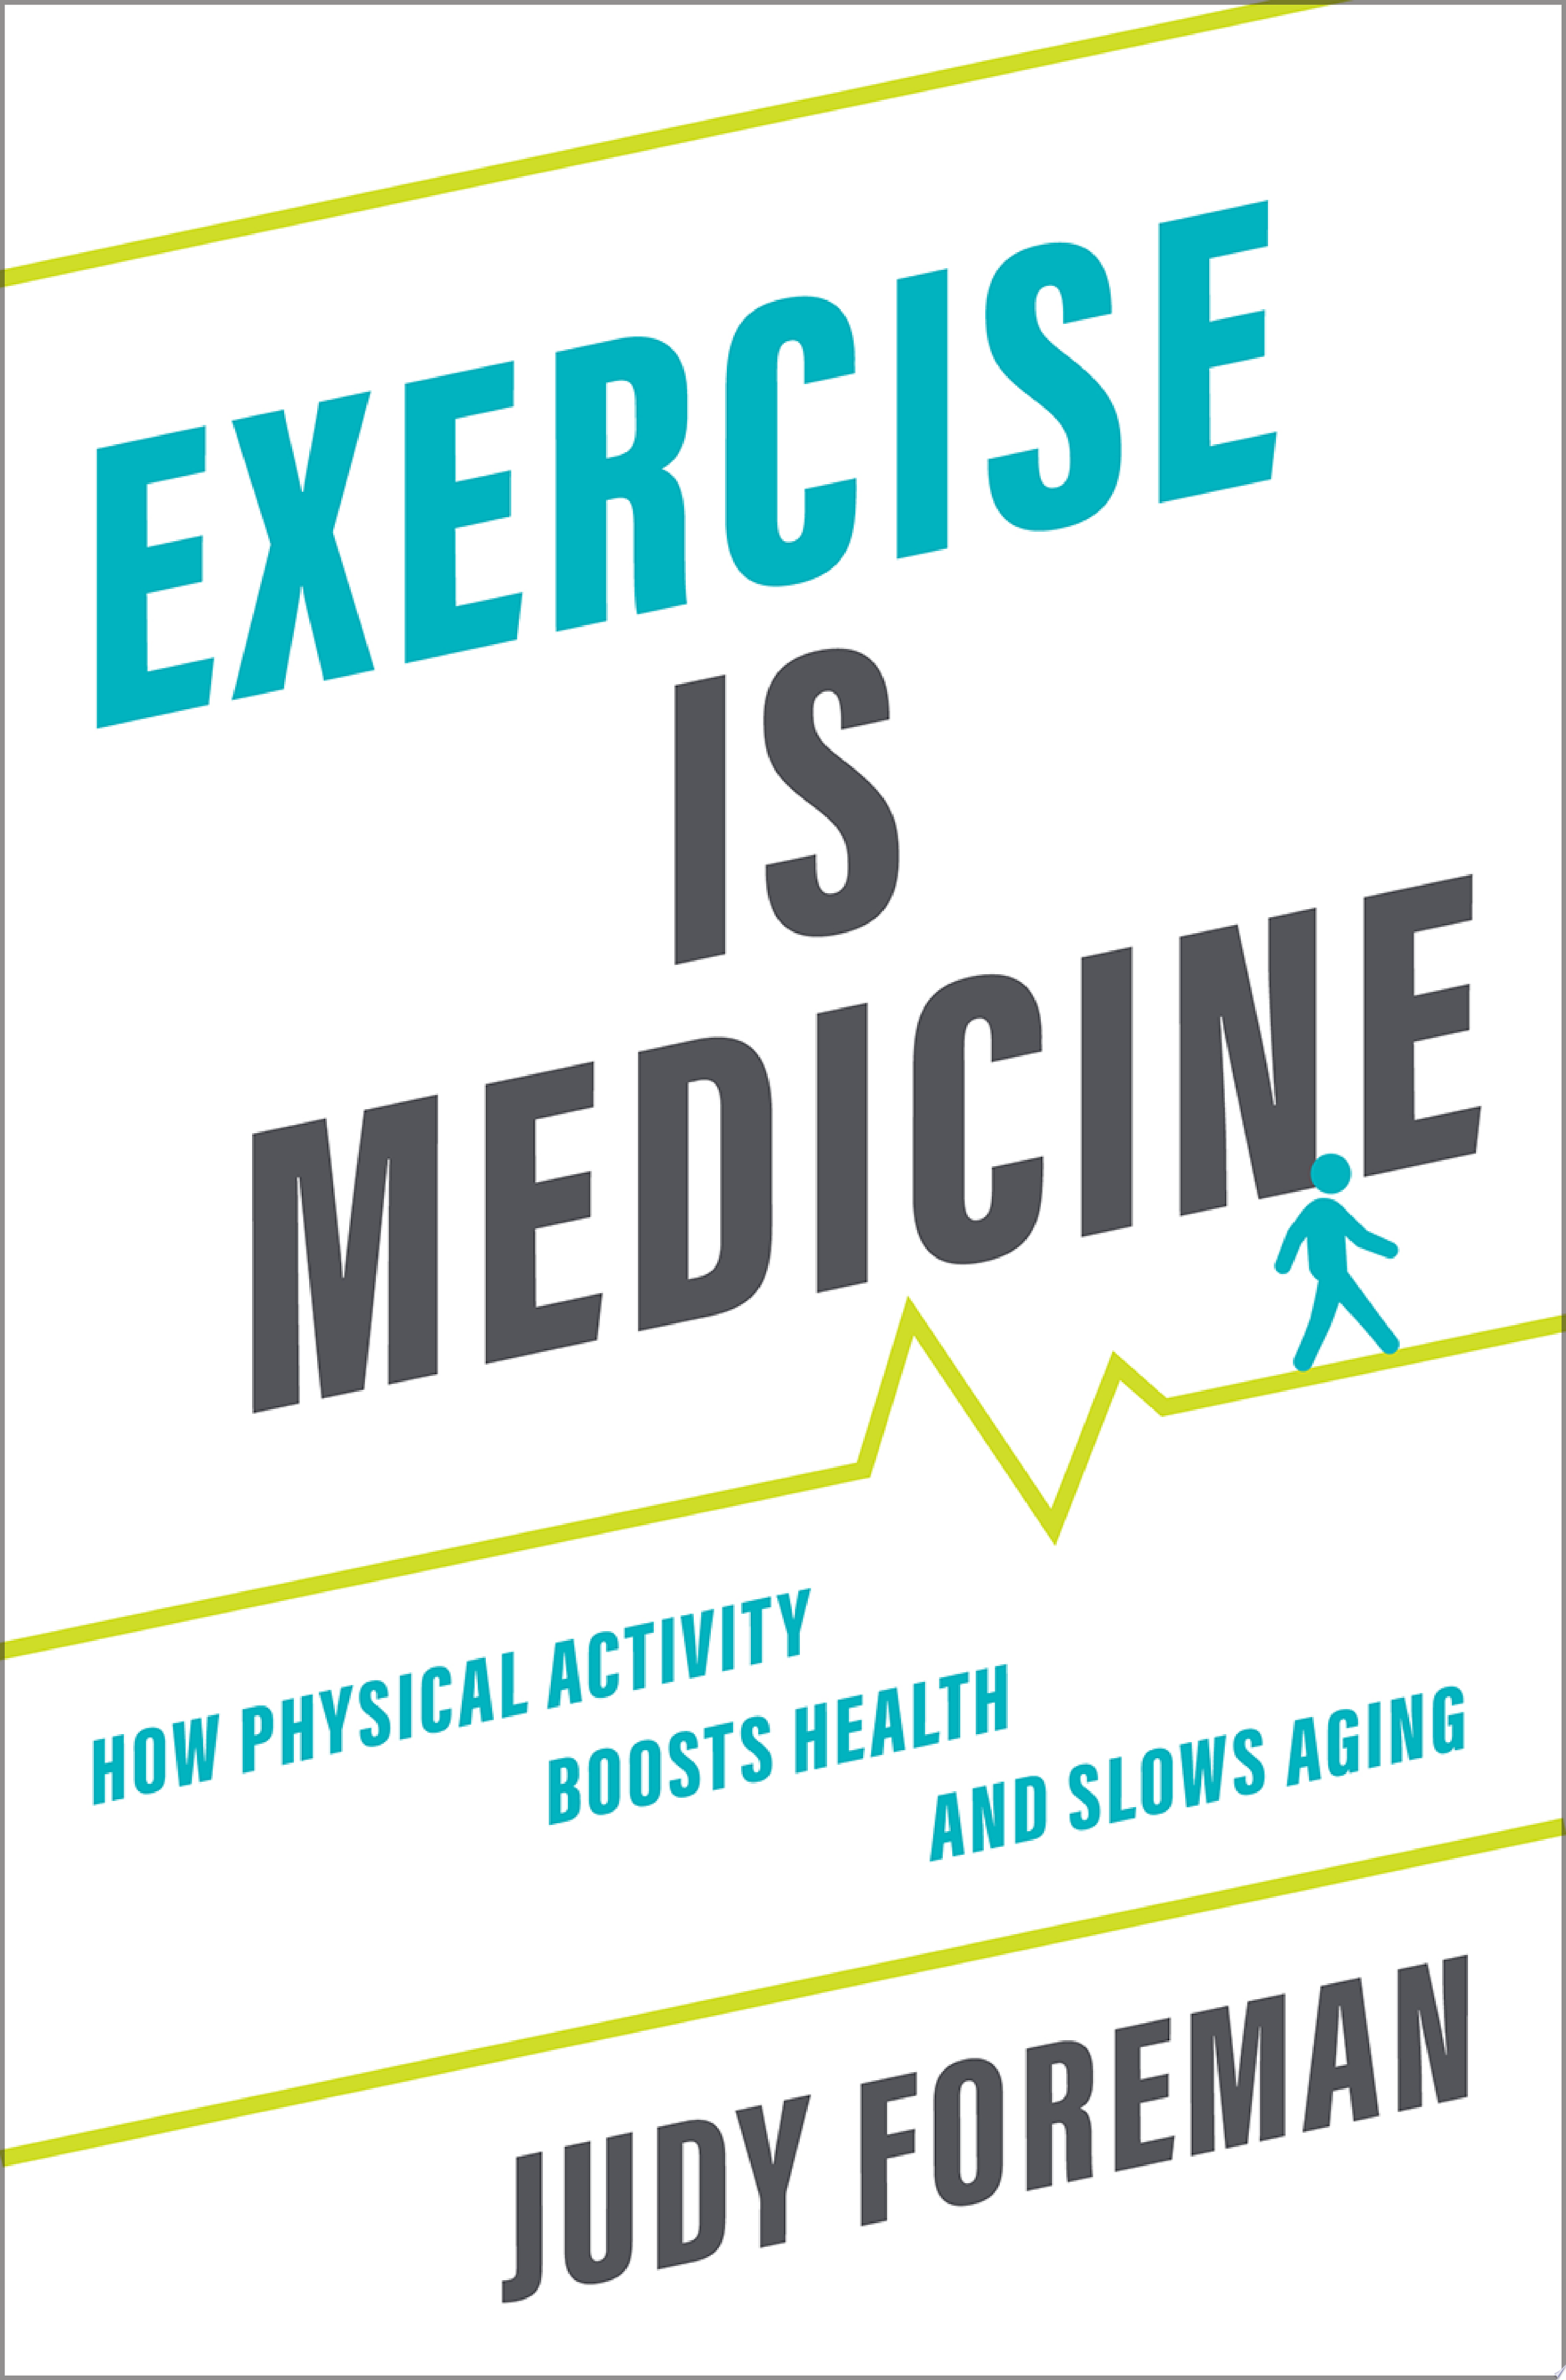 Image for "Exercise Is Medicine"